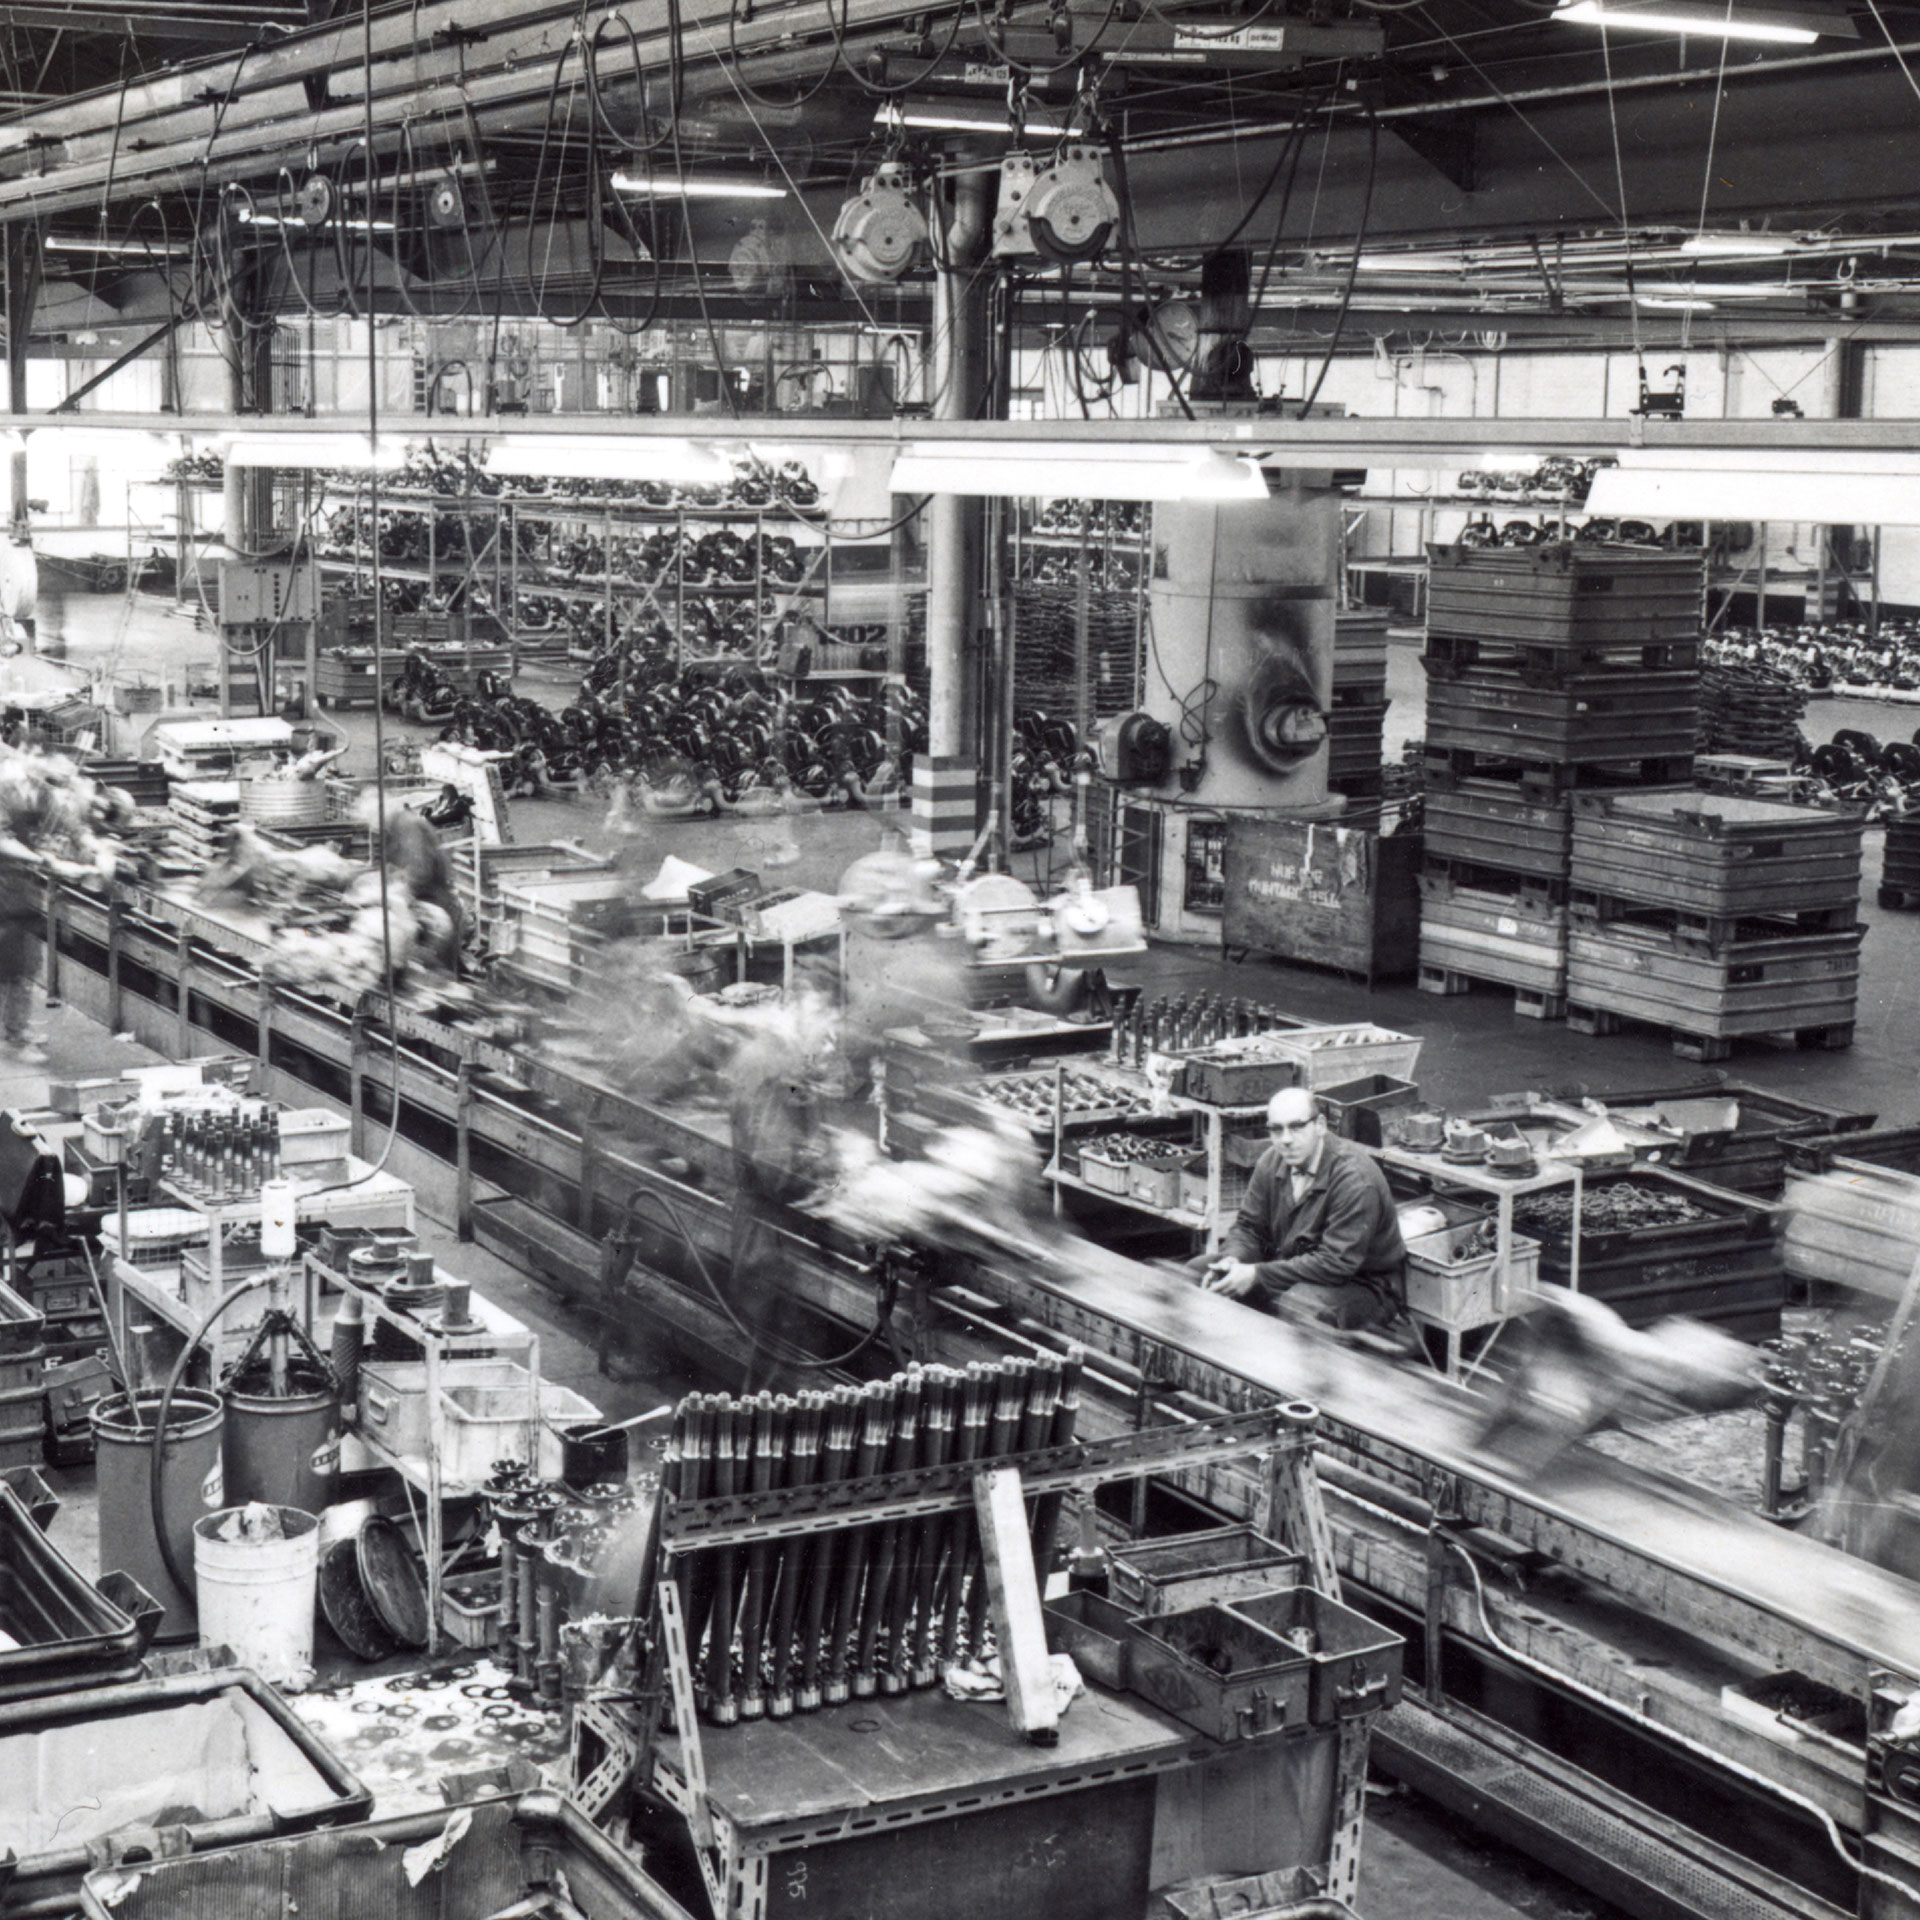 In this black and white photo, you can see the production line from the 1950s